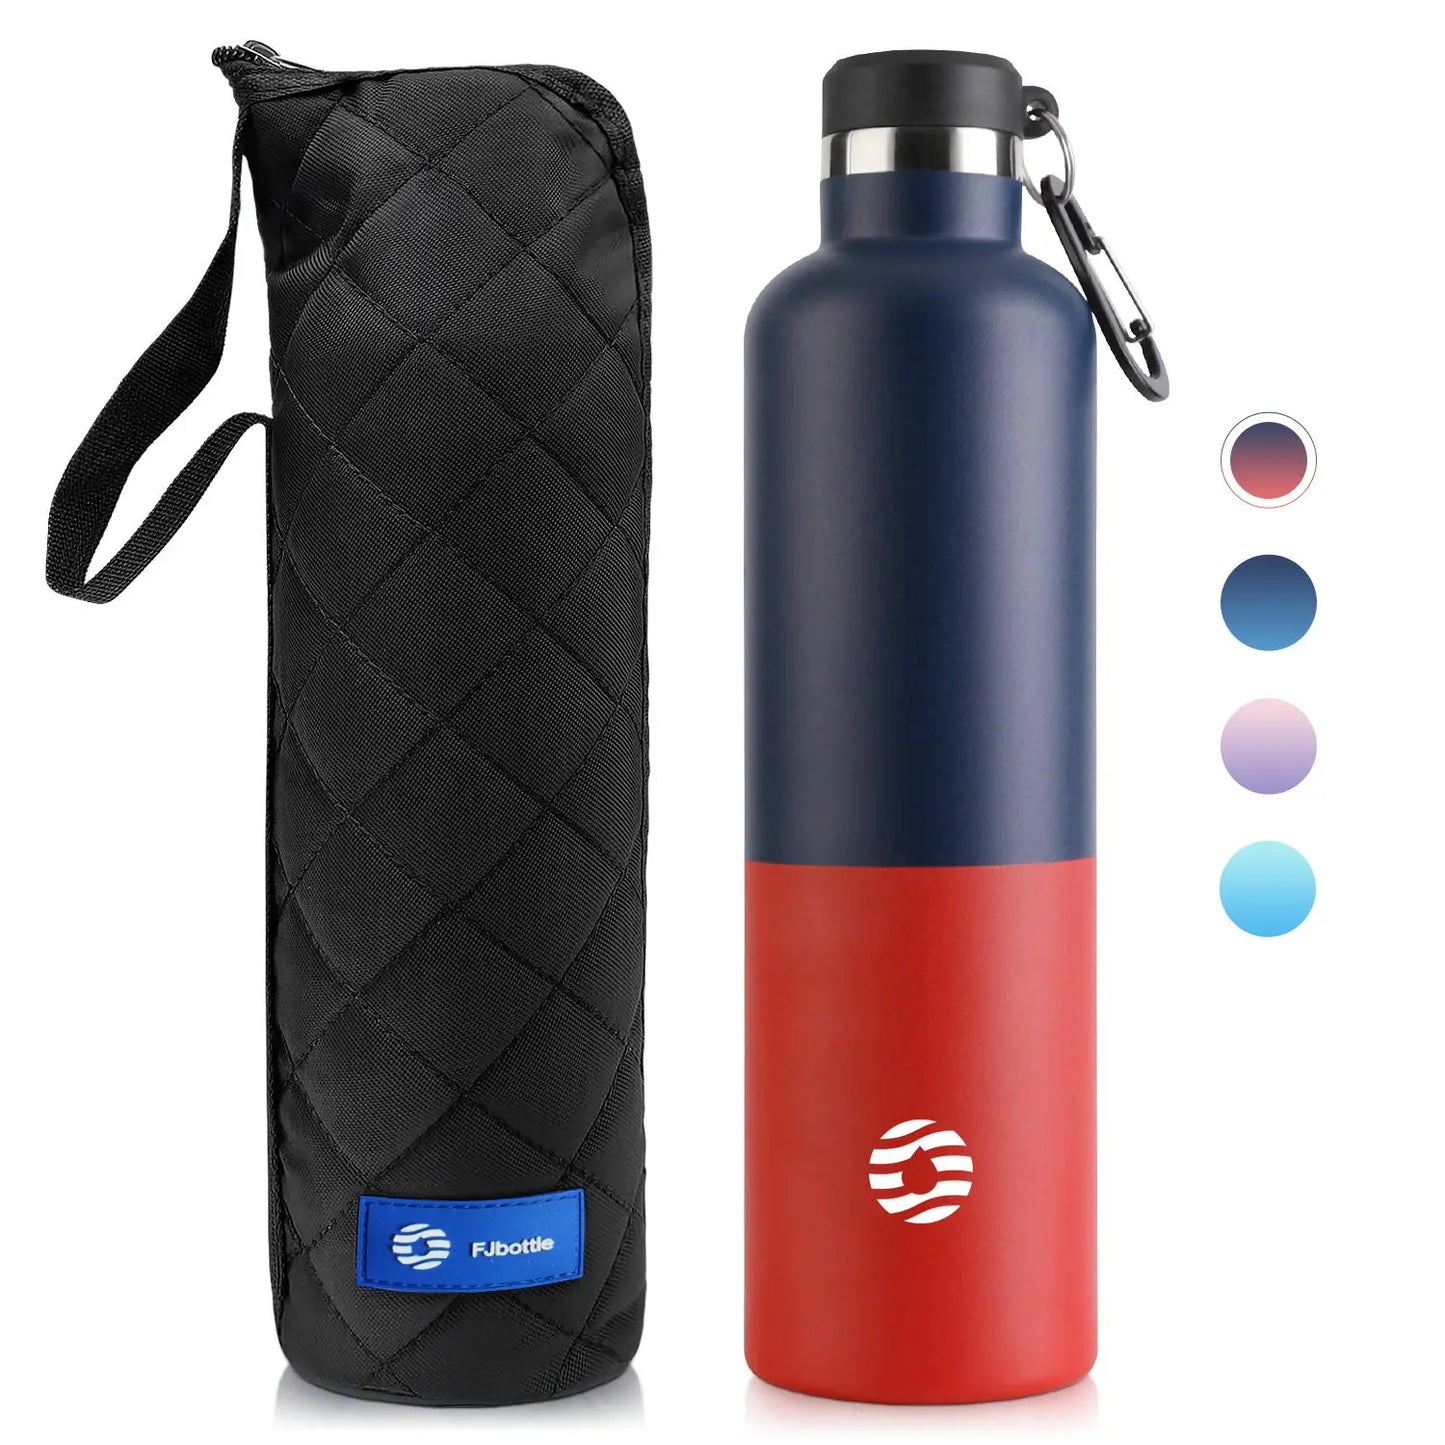 FJbottle Thermos Flask,Vacuum Bottle 18/10 Stainless Steel, 1000ML Red Blue 1000ml